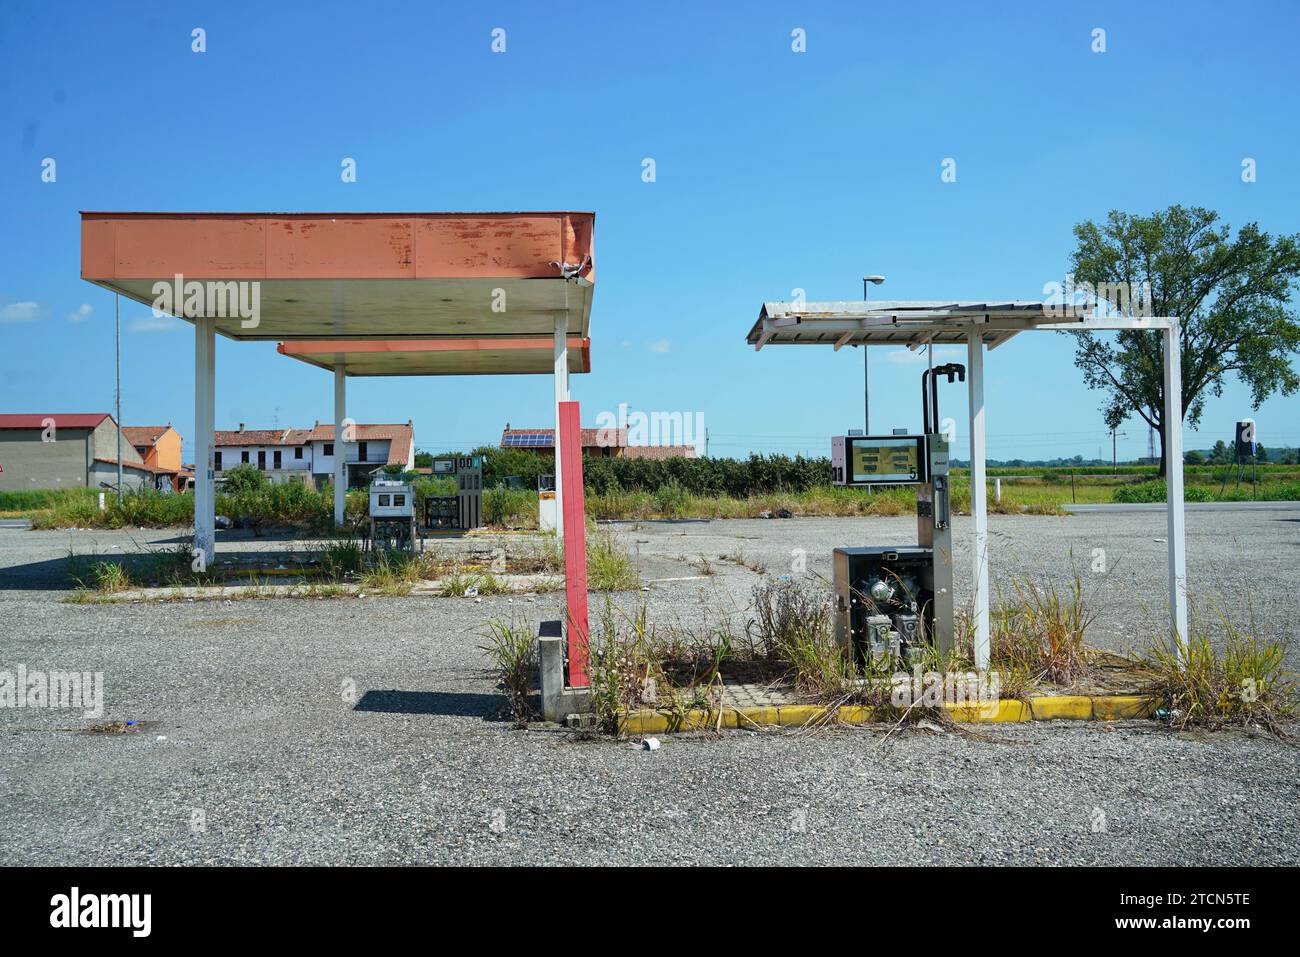 Casale / Italy - July 22, 2023: An abandoned petrol station as a symbol of the energy transition away from fossil fuels Stock Photo